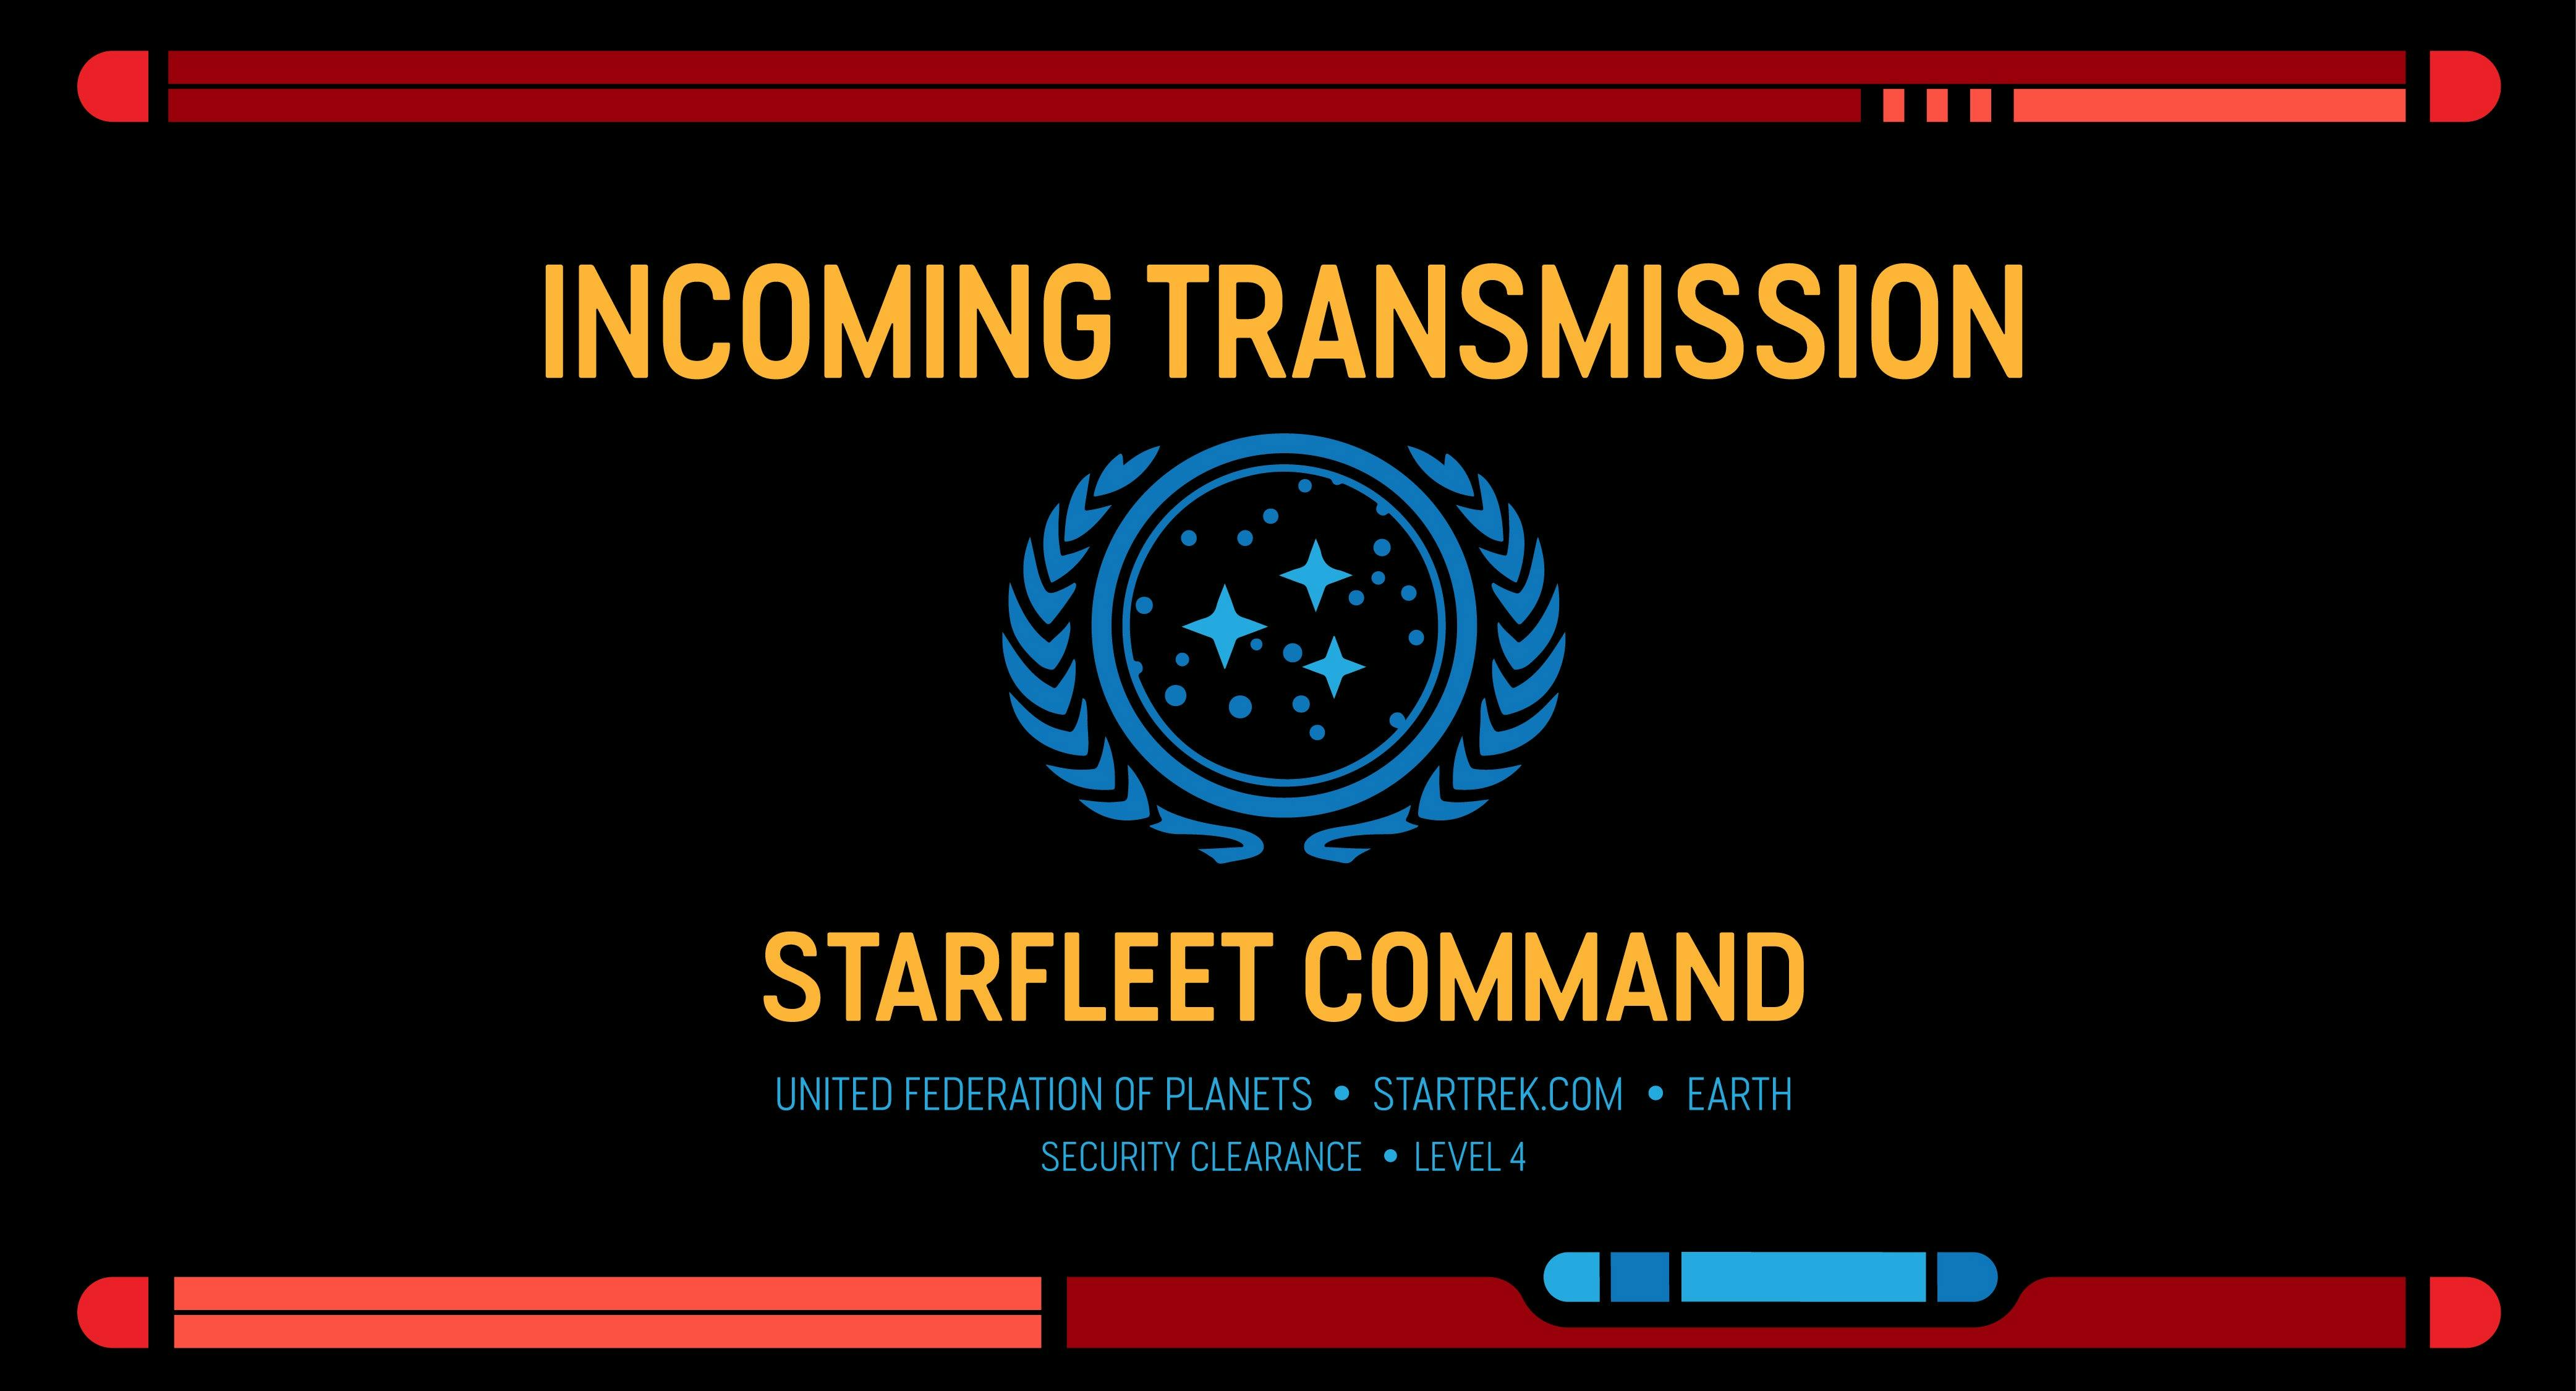 Incoming Transmission from Starfleet Command